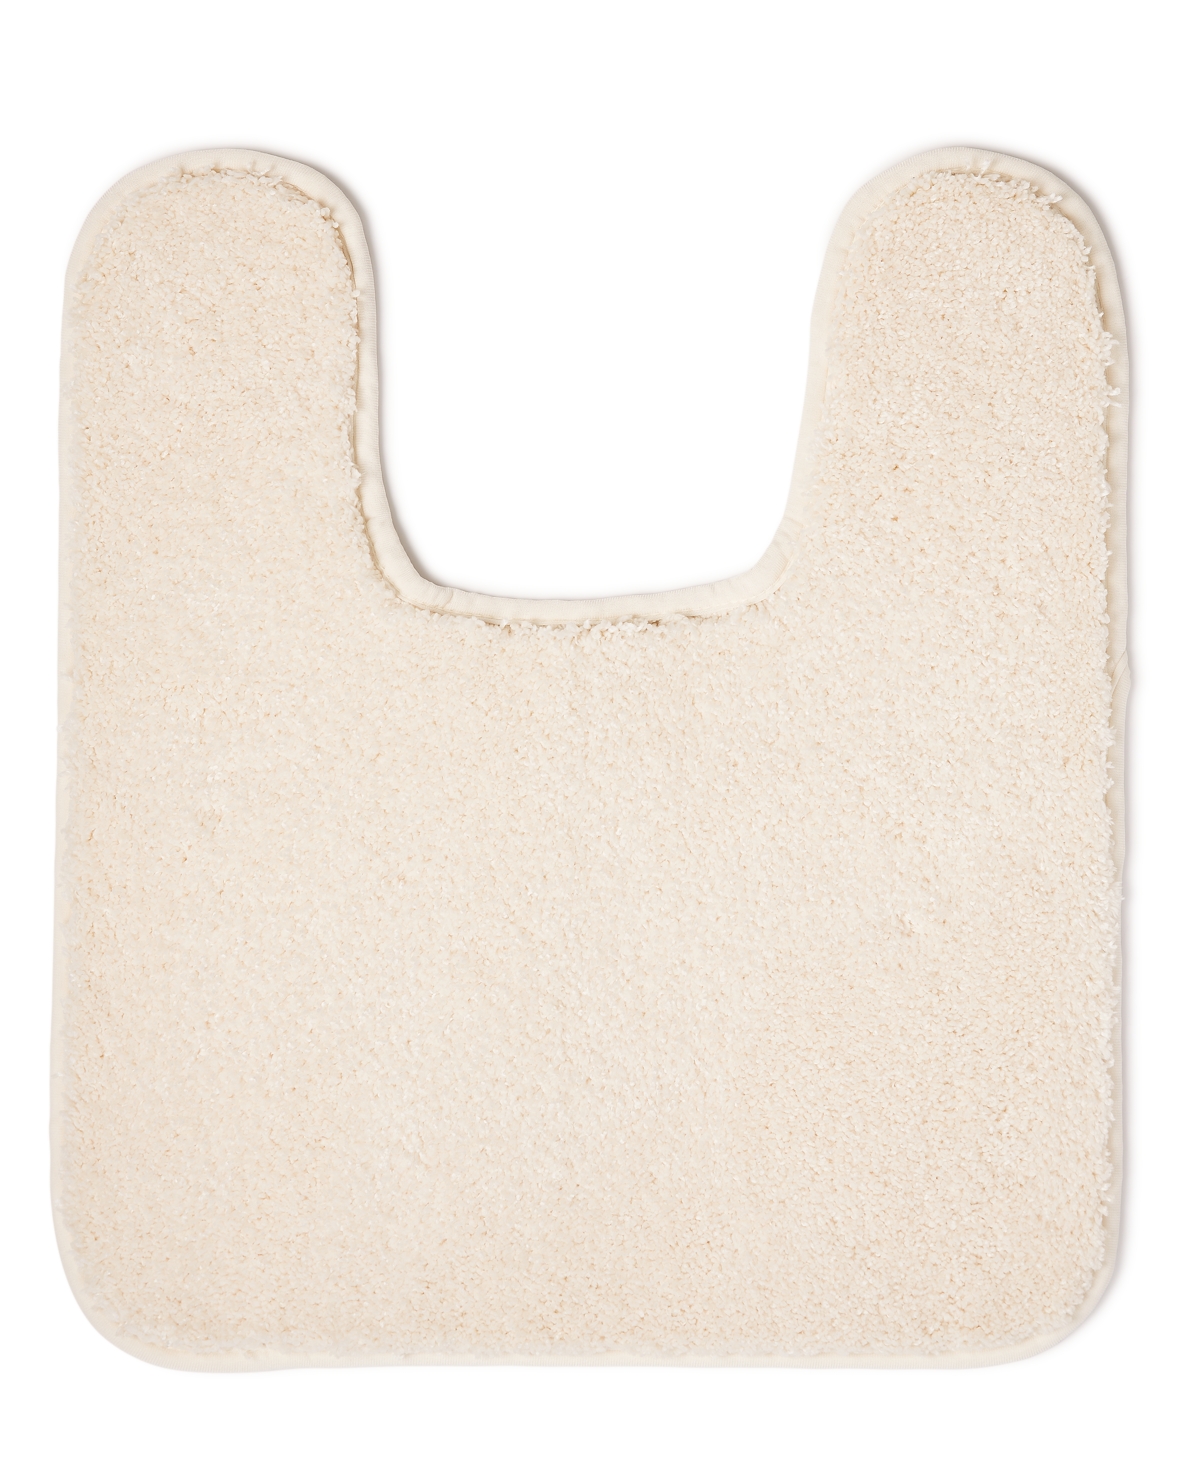 Shop Charter Club Elite Contour Bath Rug, Created For Macy's In Ivory